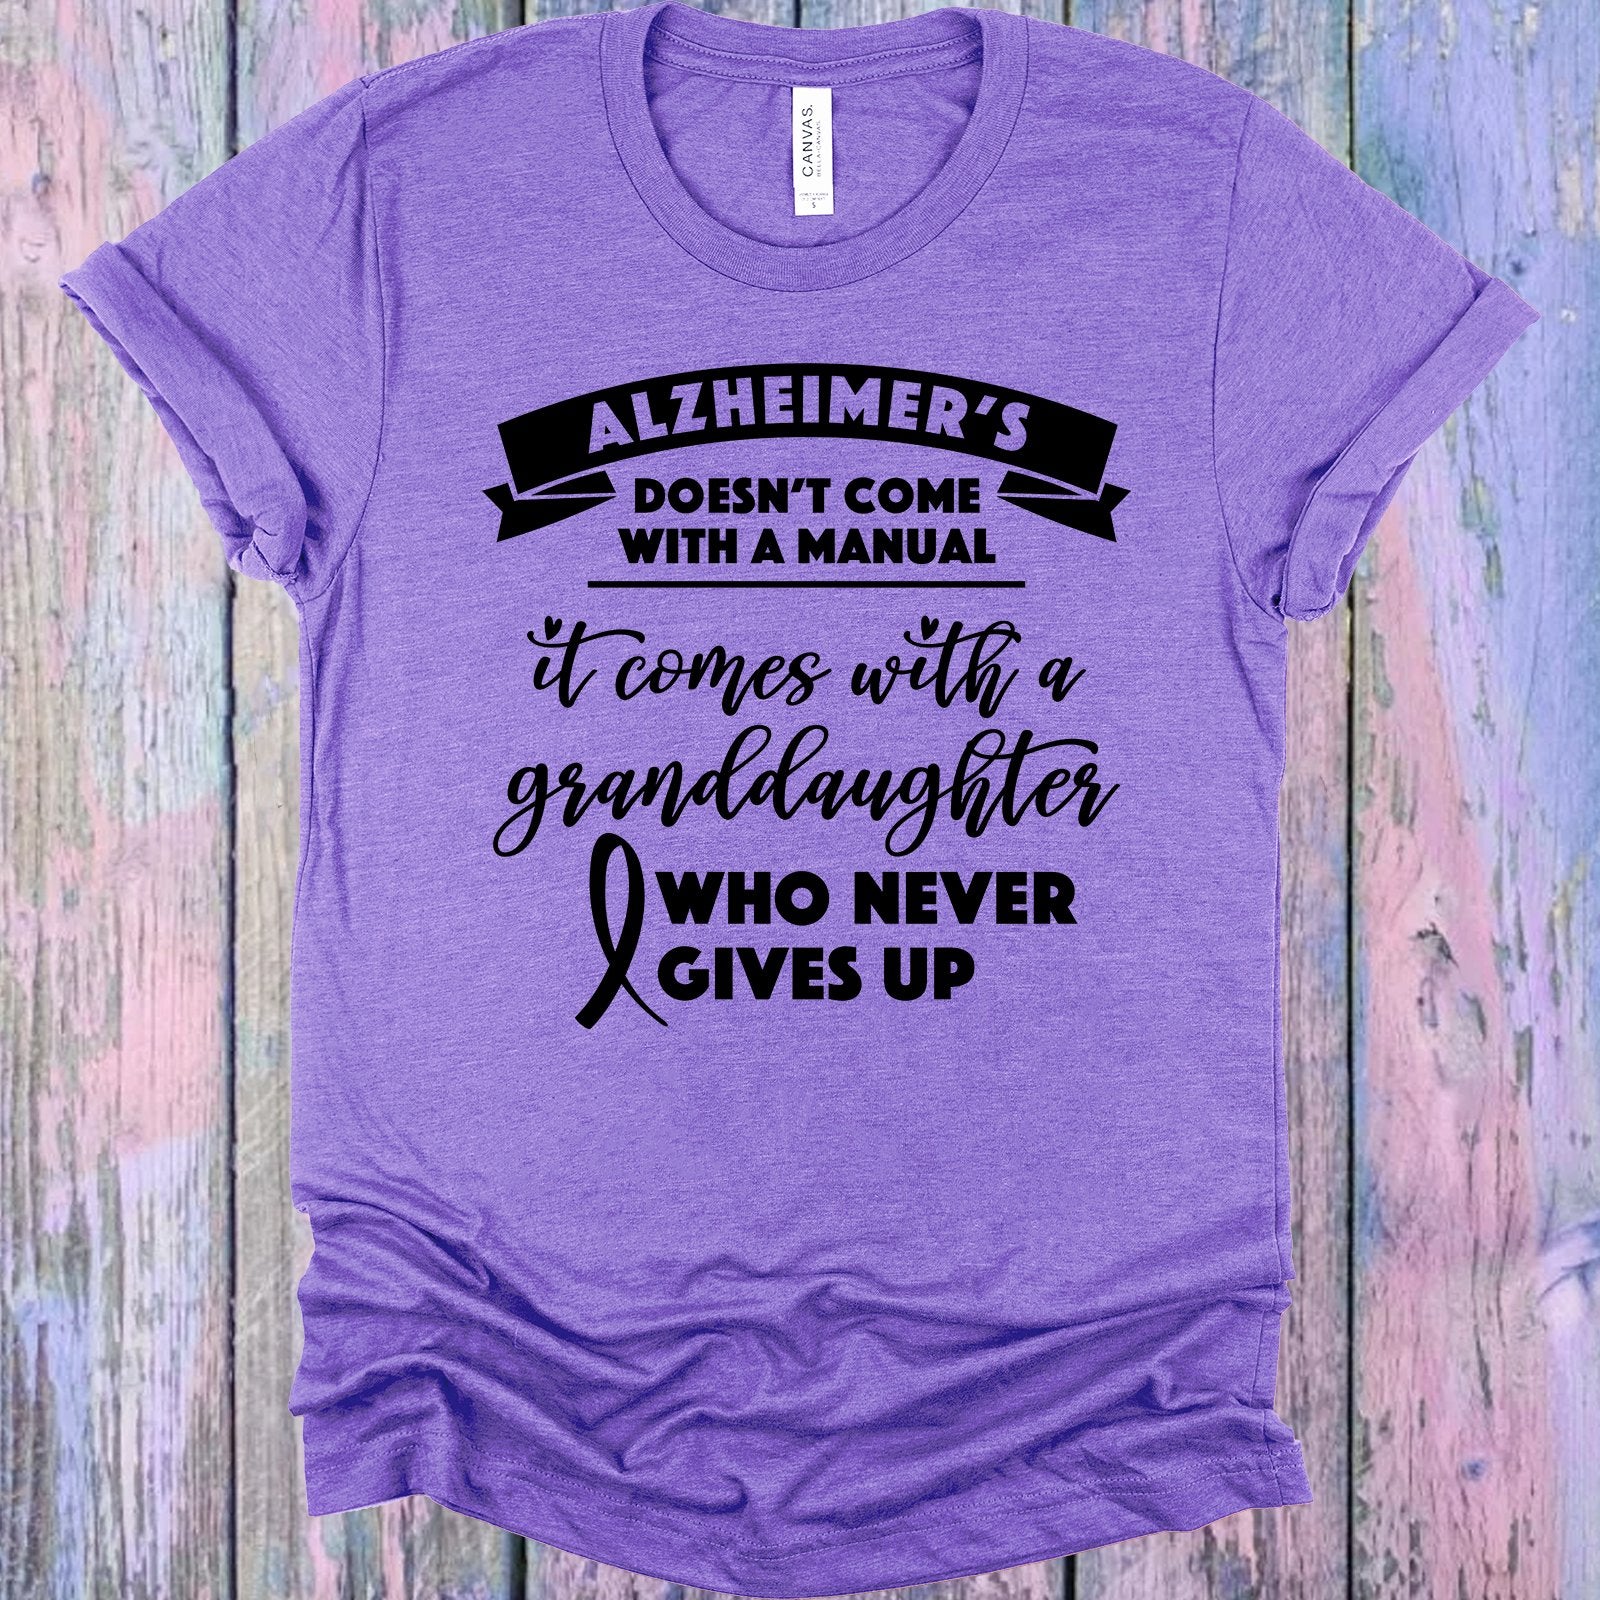 Alzheimers Doesnt Come With A Manual Graphic Tee Graphic Tee